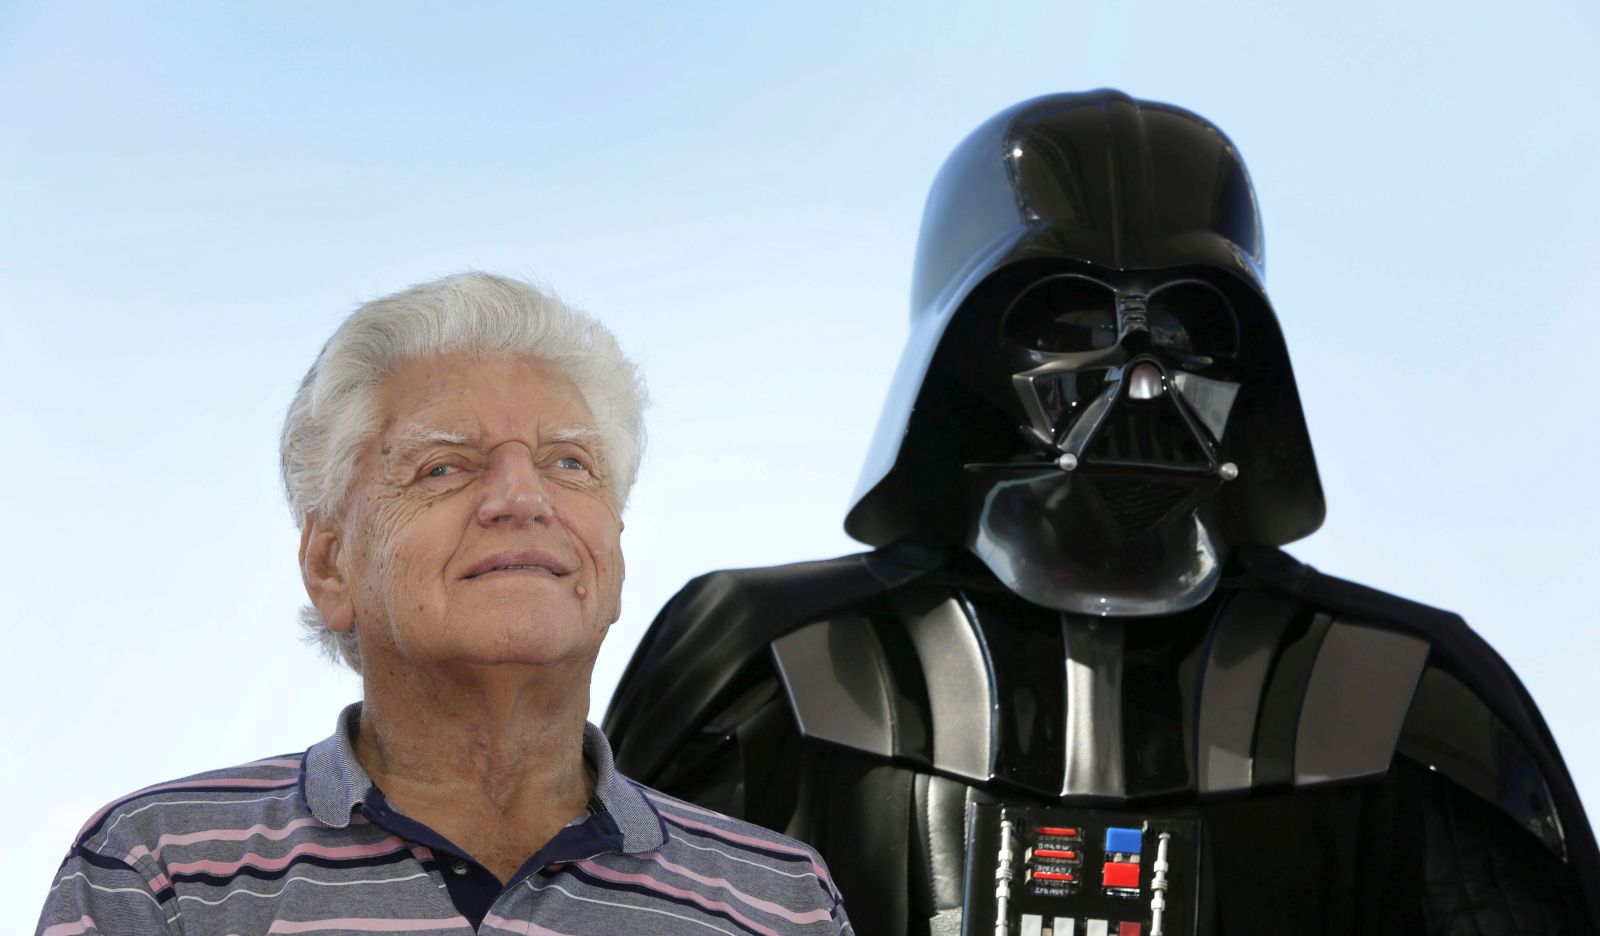 epa08850181 (FILE) - British actor David Prowse, who played Darth Vader in the original Star Wars movie trilogy, poses for photographers during the presentation of 'I Am Your Father' at the 48th Sitges International Fantastic Film Festival, in Sitges, near Barcelona, Spain, 12 October 2015 (reissued 29 November 2020). According to his agent Thomas Bowington, David Prowse has died aged 85.  EPA/SUSANNA SAEZ